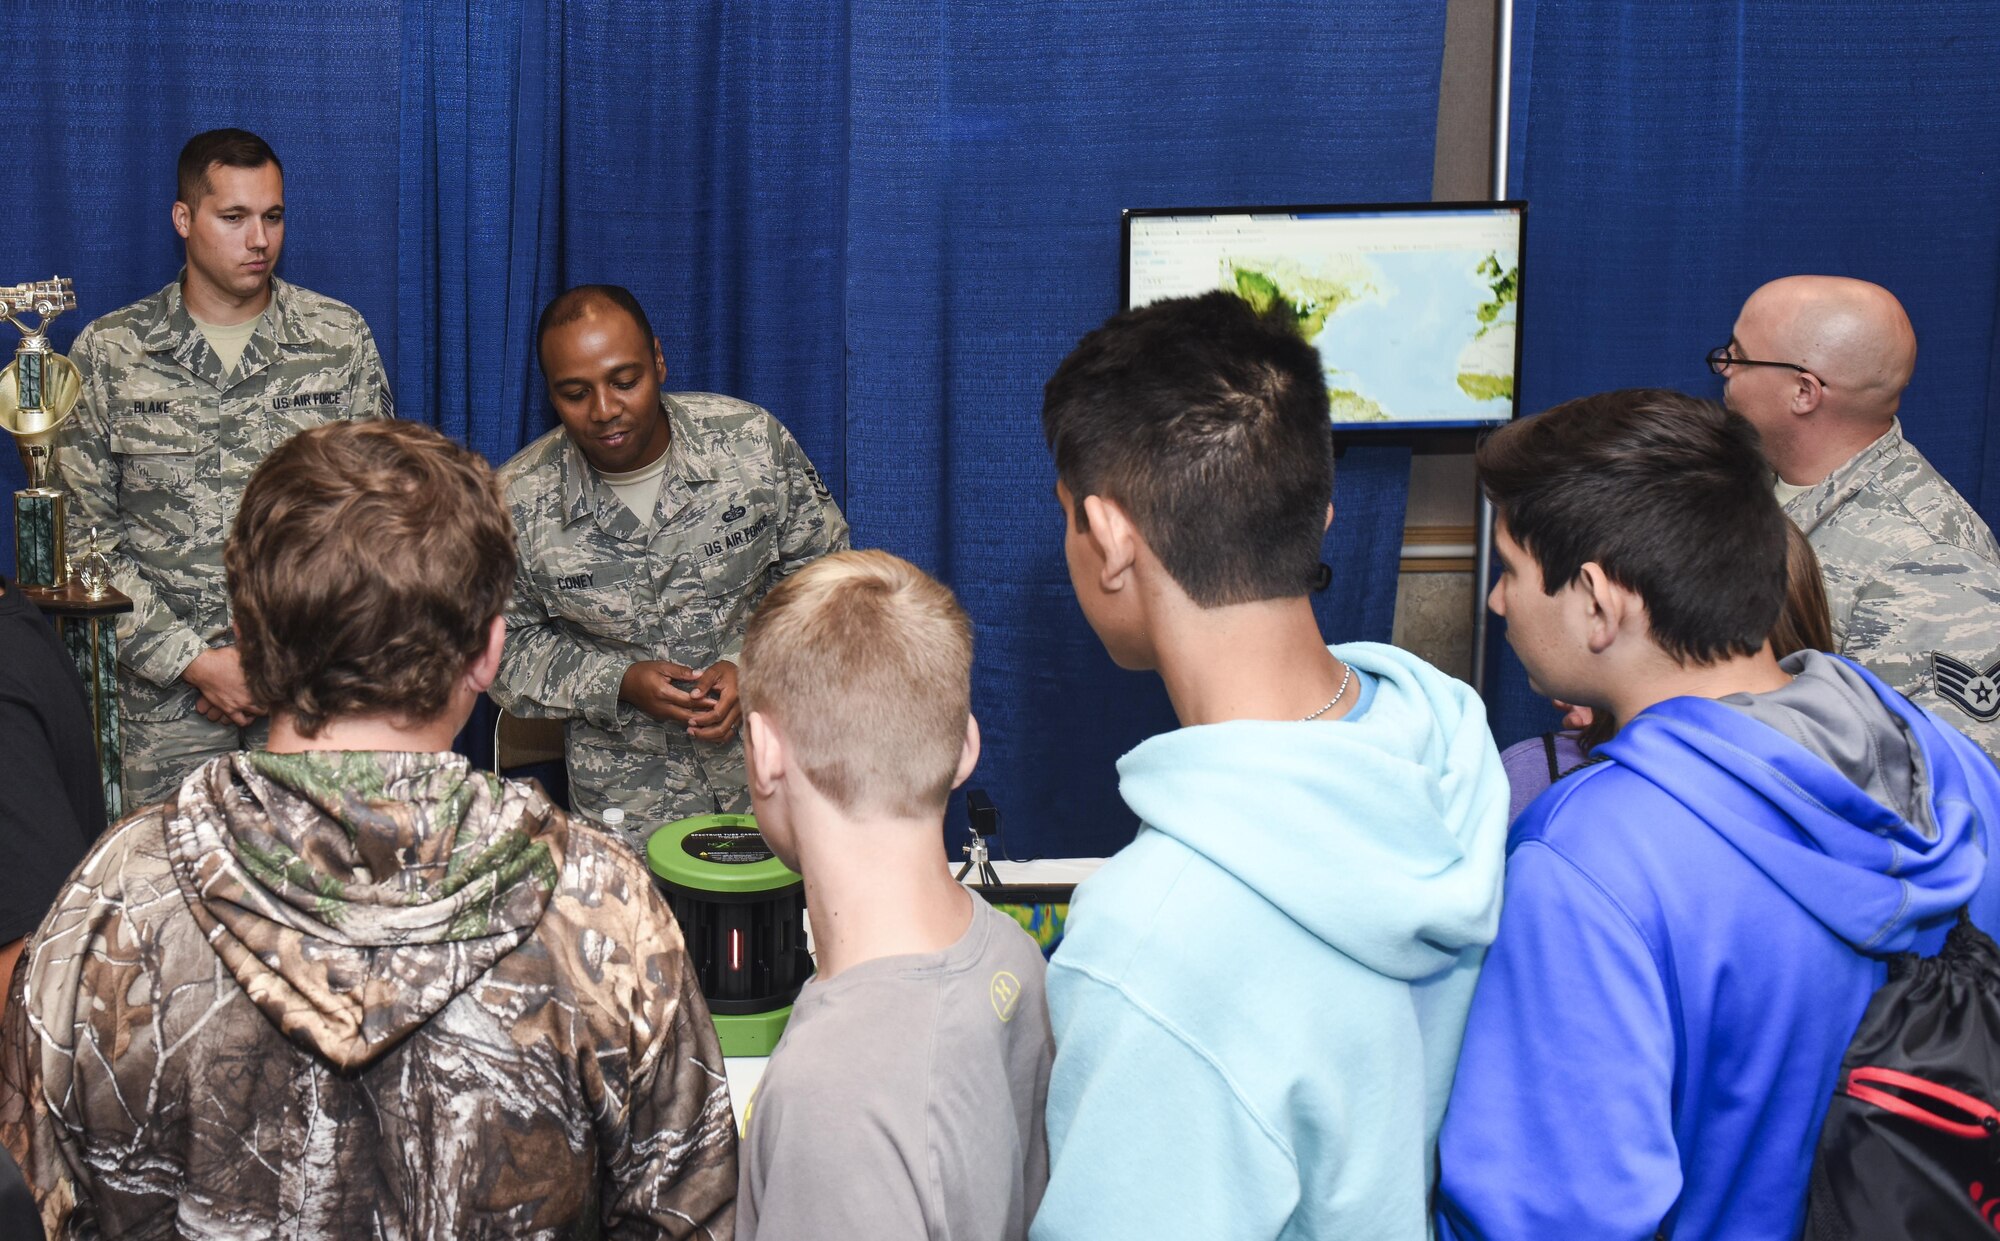 U.S. Air Force Staff Sgt. Ernest Coney, 312th Training Squadron instructor, explains to a group of Sterling City eighth graders how the seismometer measures vibrations in the earth during the Annual Business expo at the McNease Convention Center in San Angelo, Texas, Sept. 27, 2017. Goodfellow Air Force Base provided representatives from the fire academy and the 312th TRS to speak to students about potential career fields in the Air Force. (U.S. Air Force photo by Aryn Lockhart/Released)